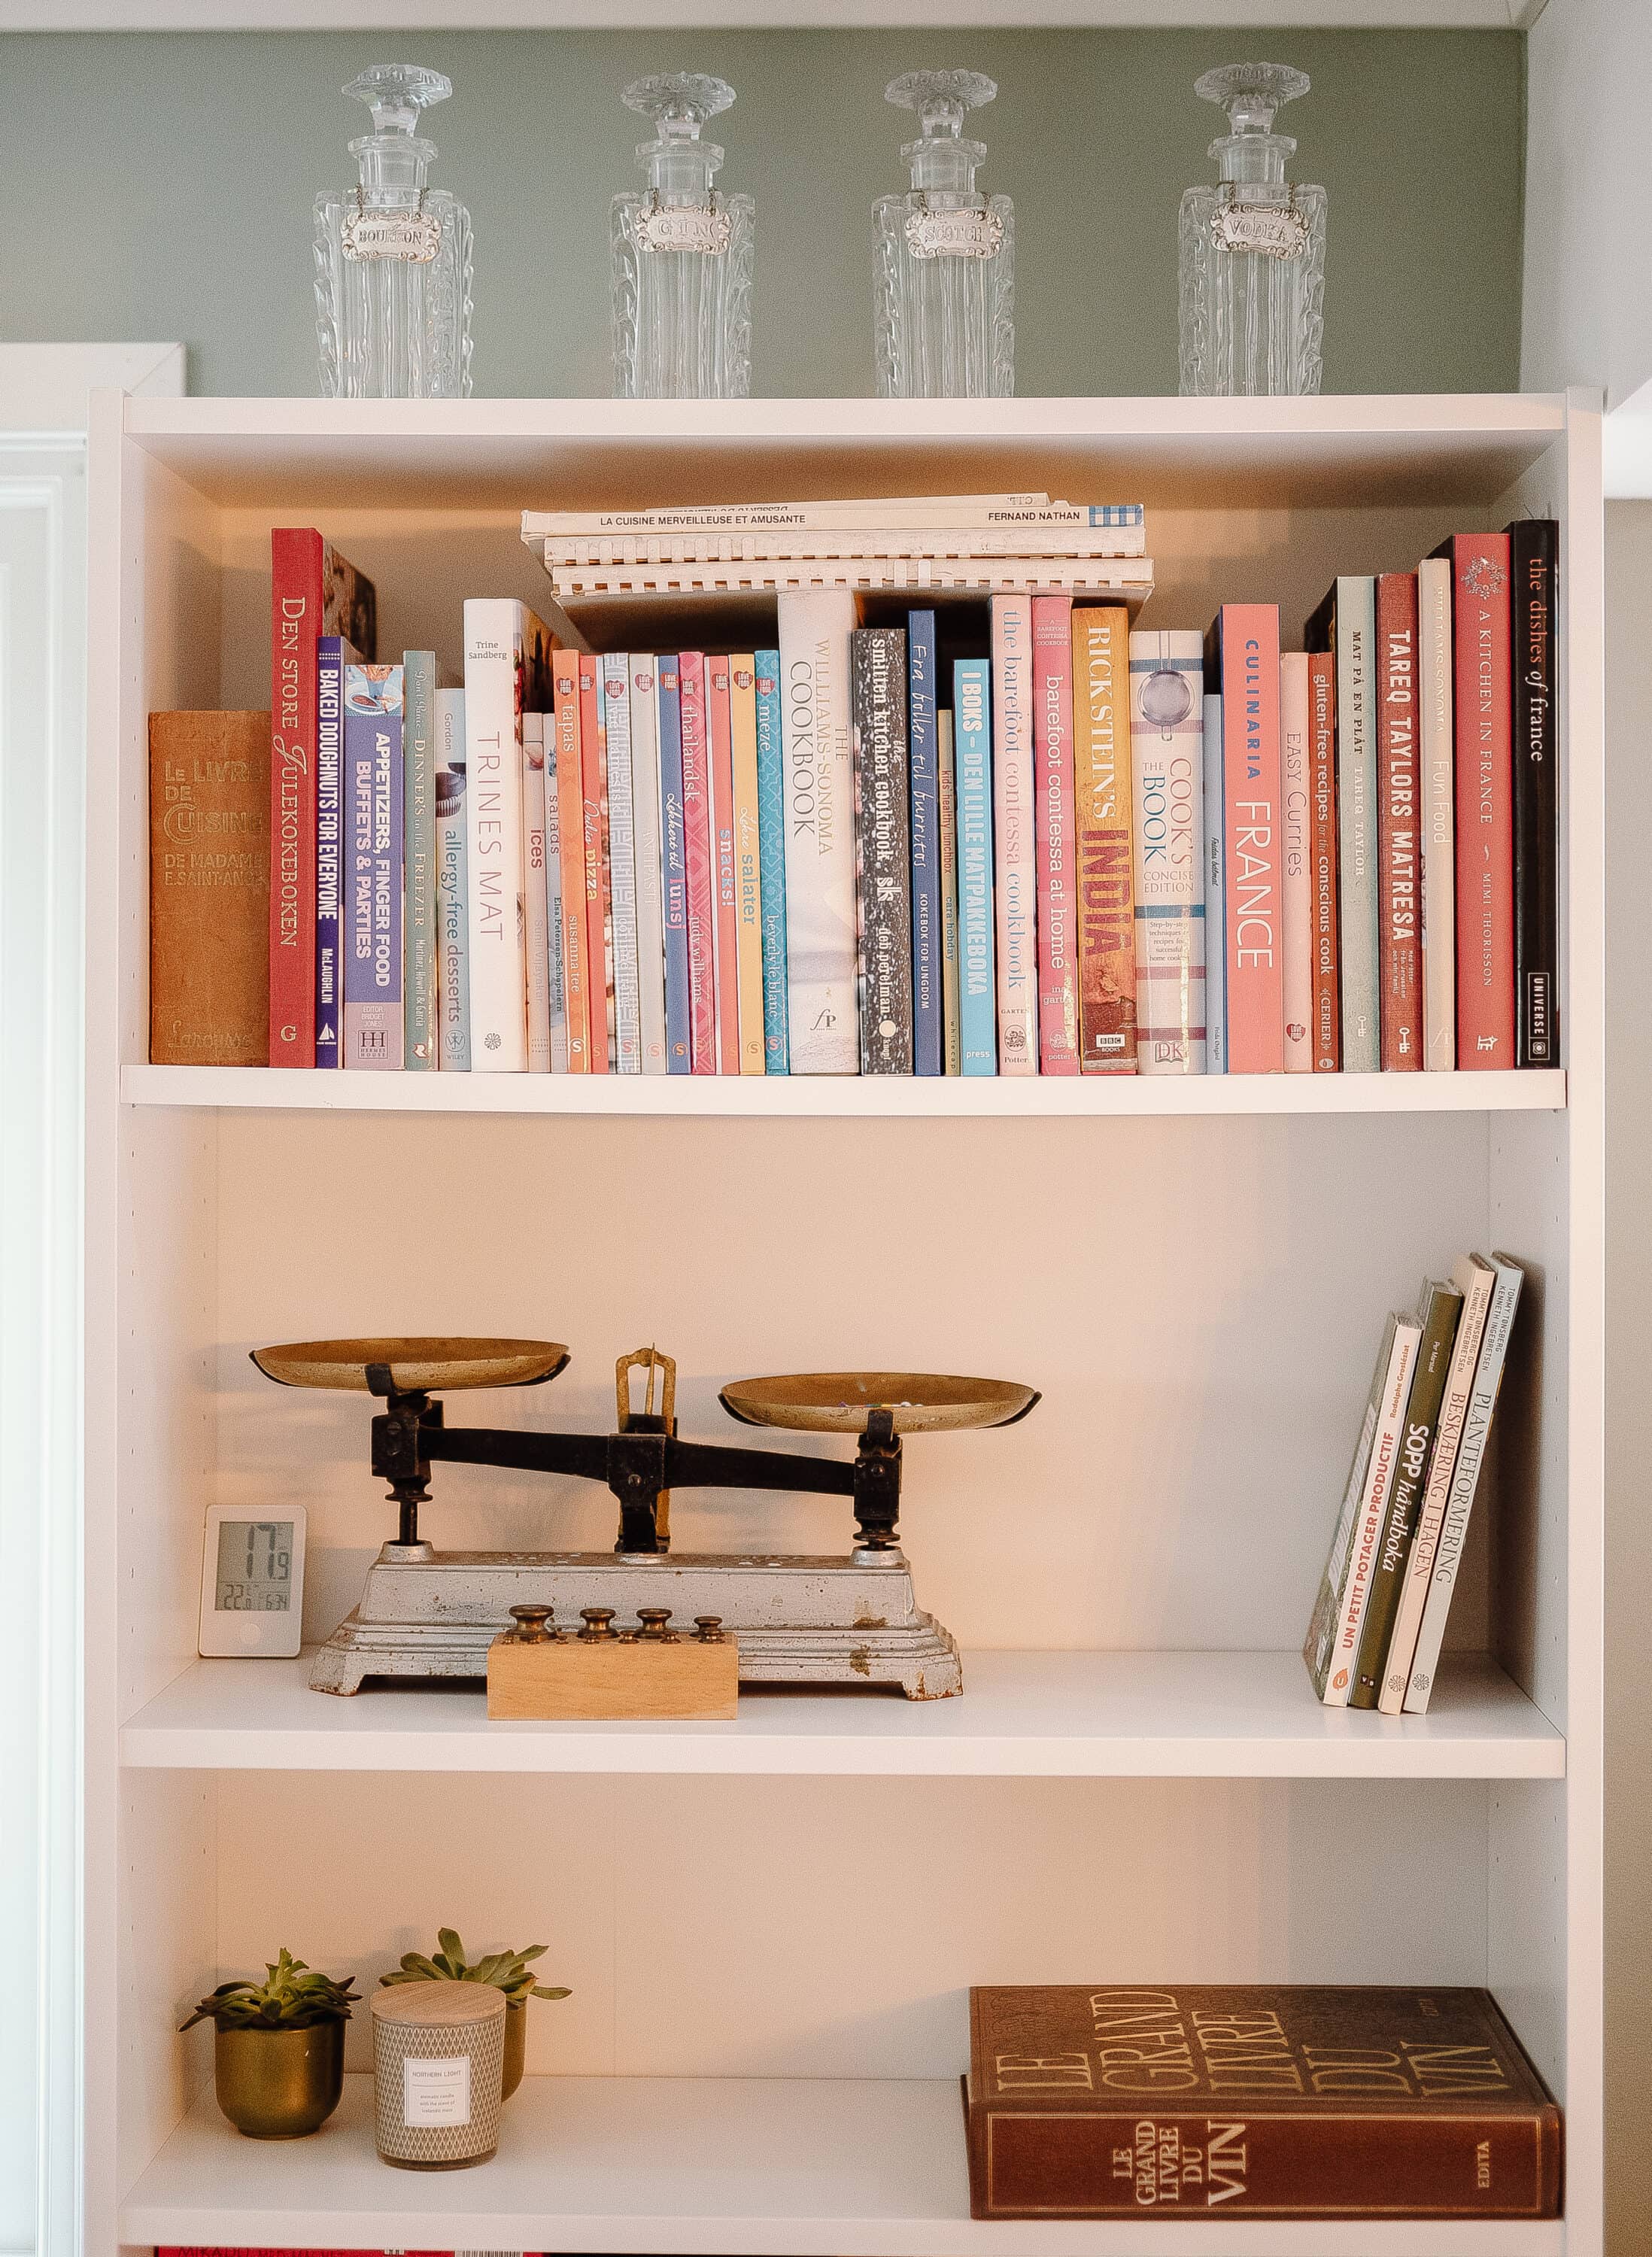 How to decorate a shelf with minimalist design